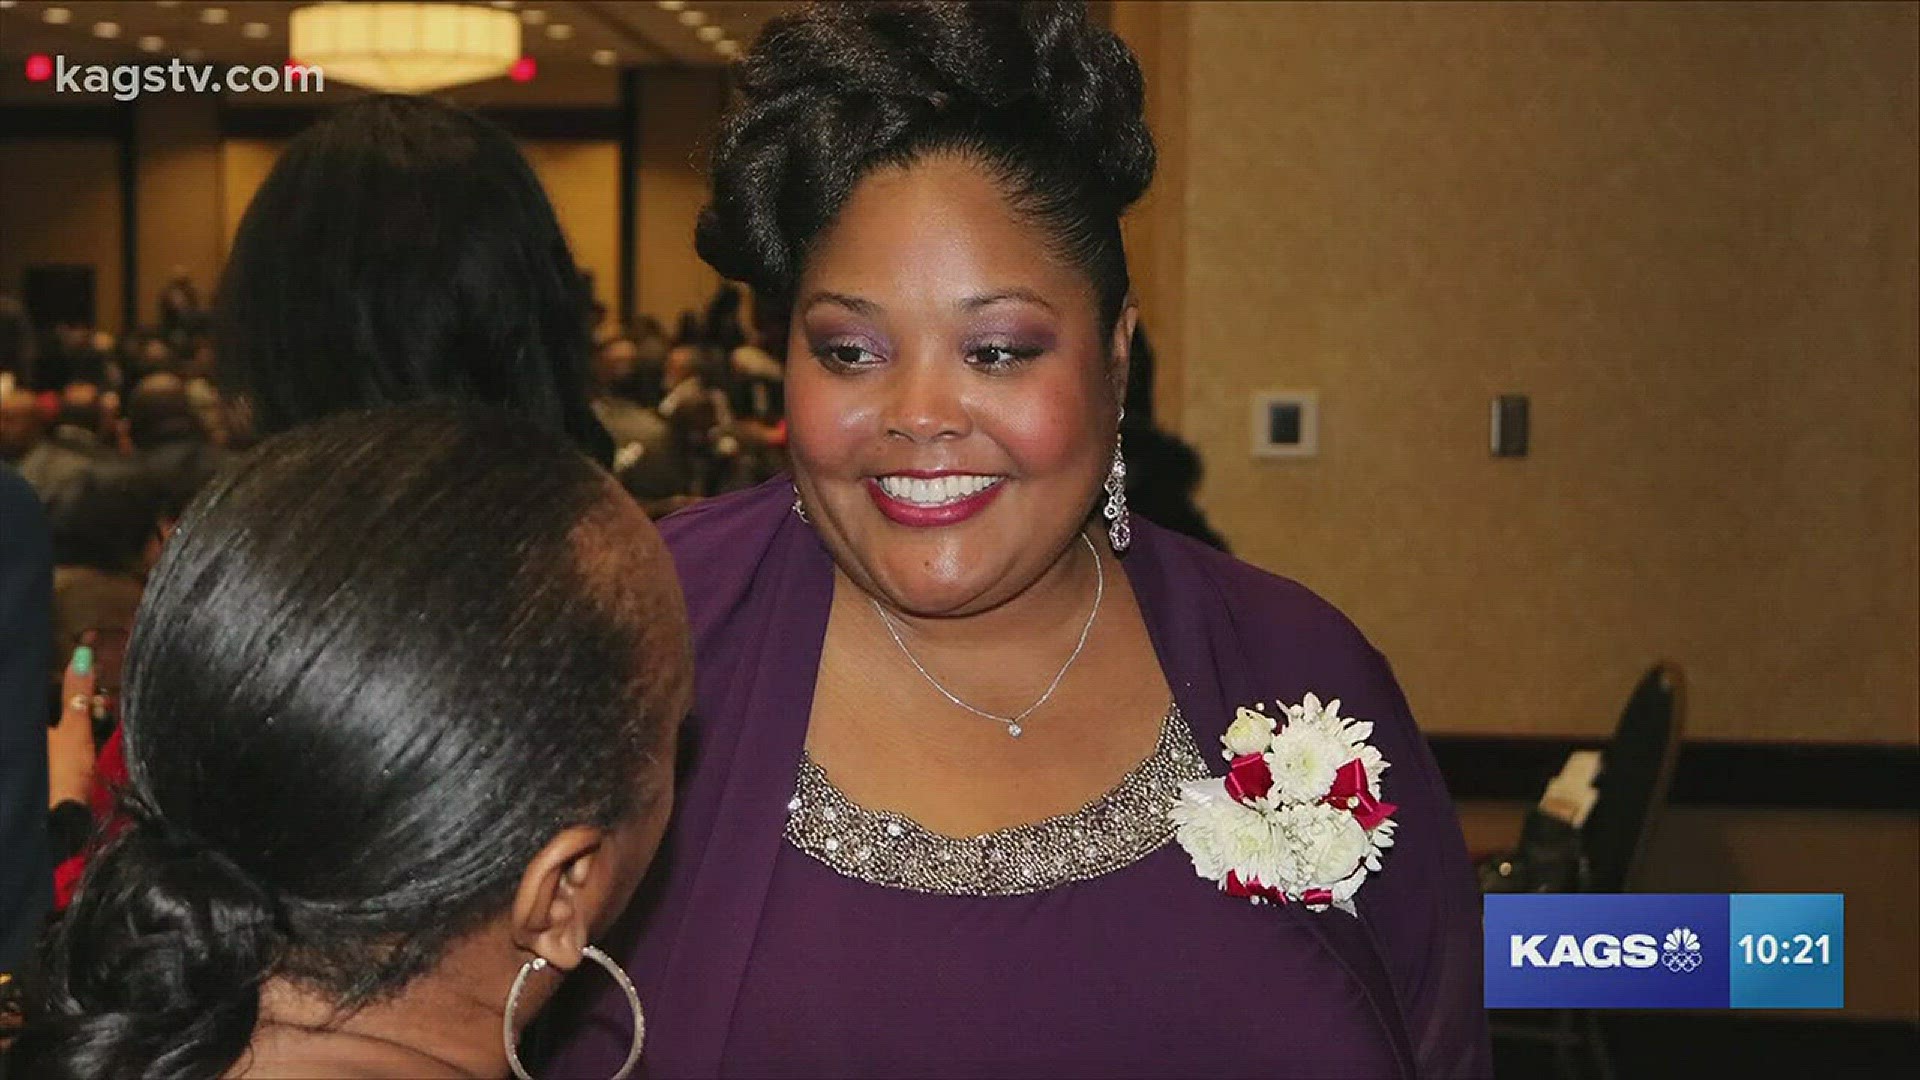 The Brazos Valley African American National Heritage Society honored our very own Shannon Madlock at their annual appreciation banquet at the College Station Hilton.